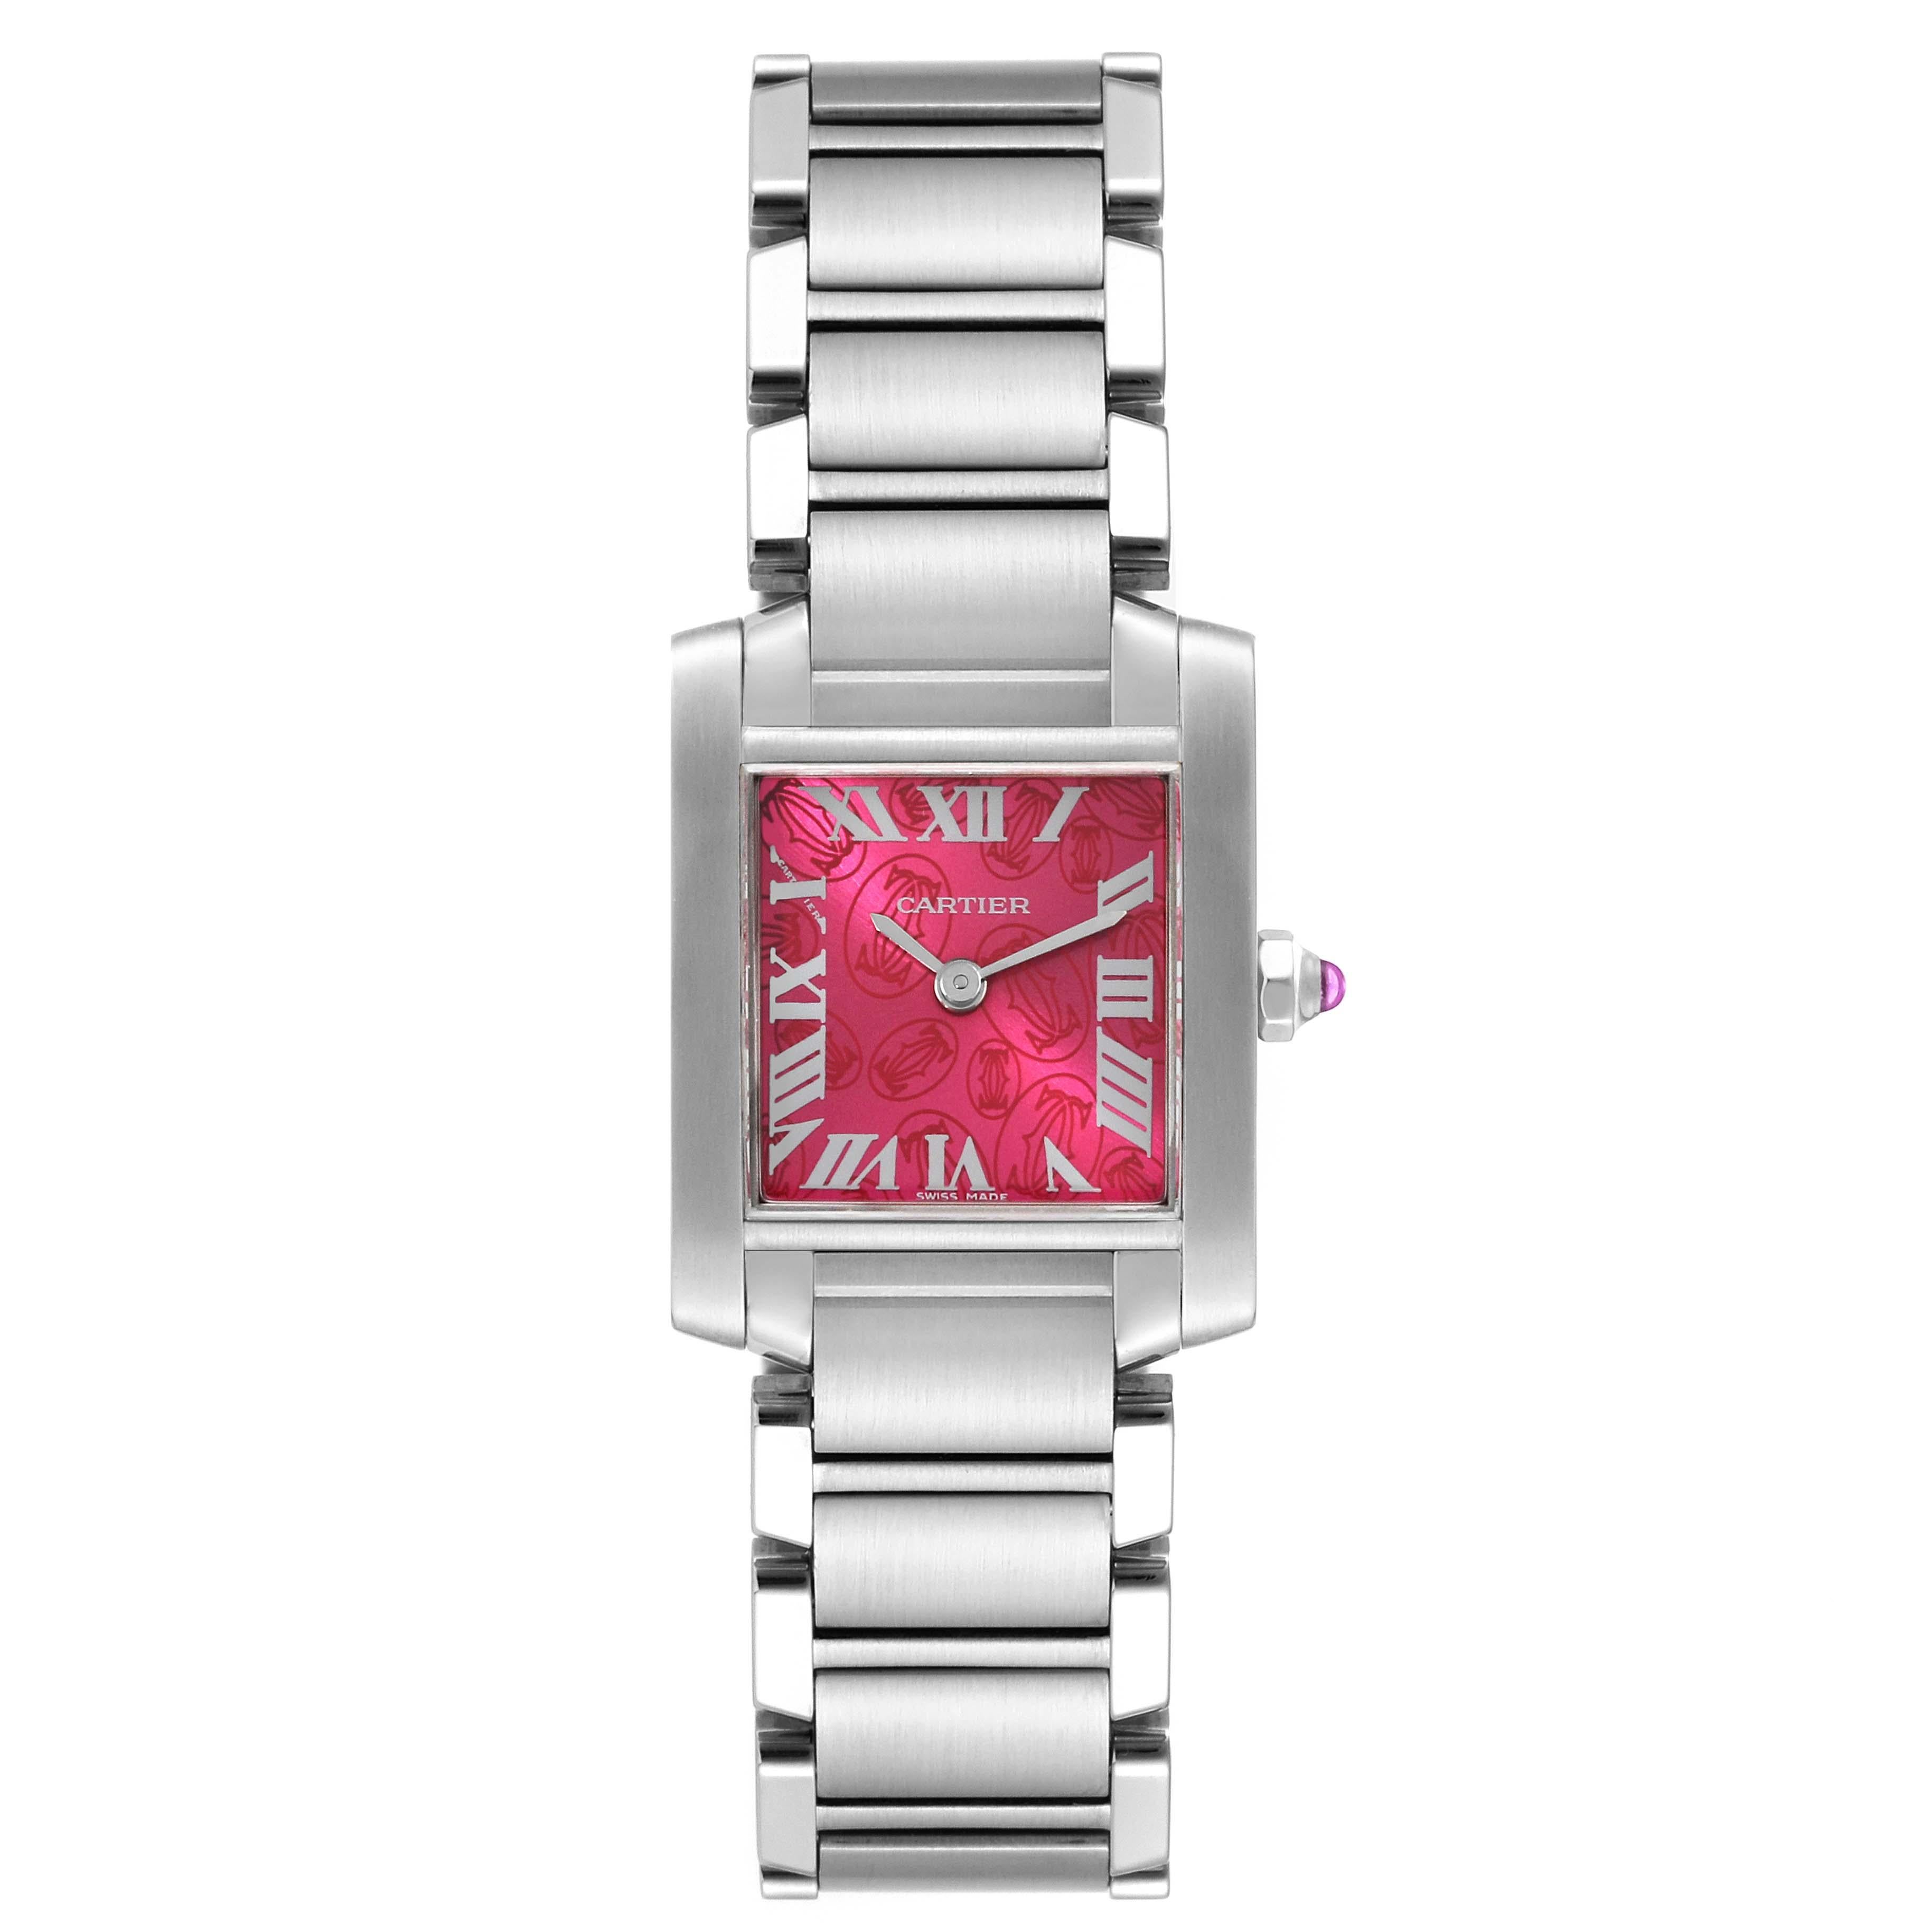 Cartier Tank Francaise Raspberry Dial Limited Edition Steel Watch W51030Q3 For Sale 1